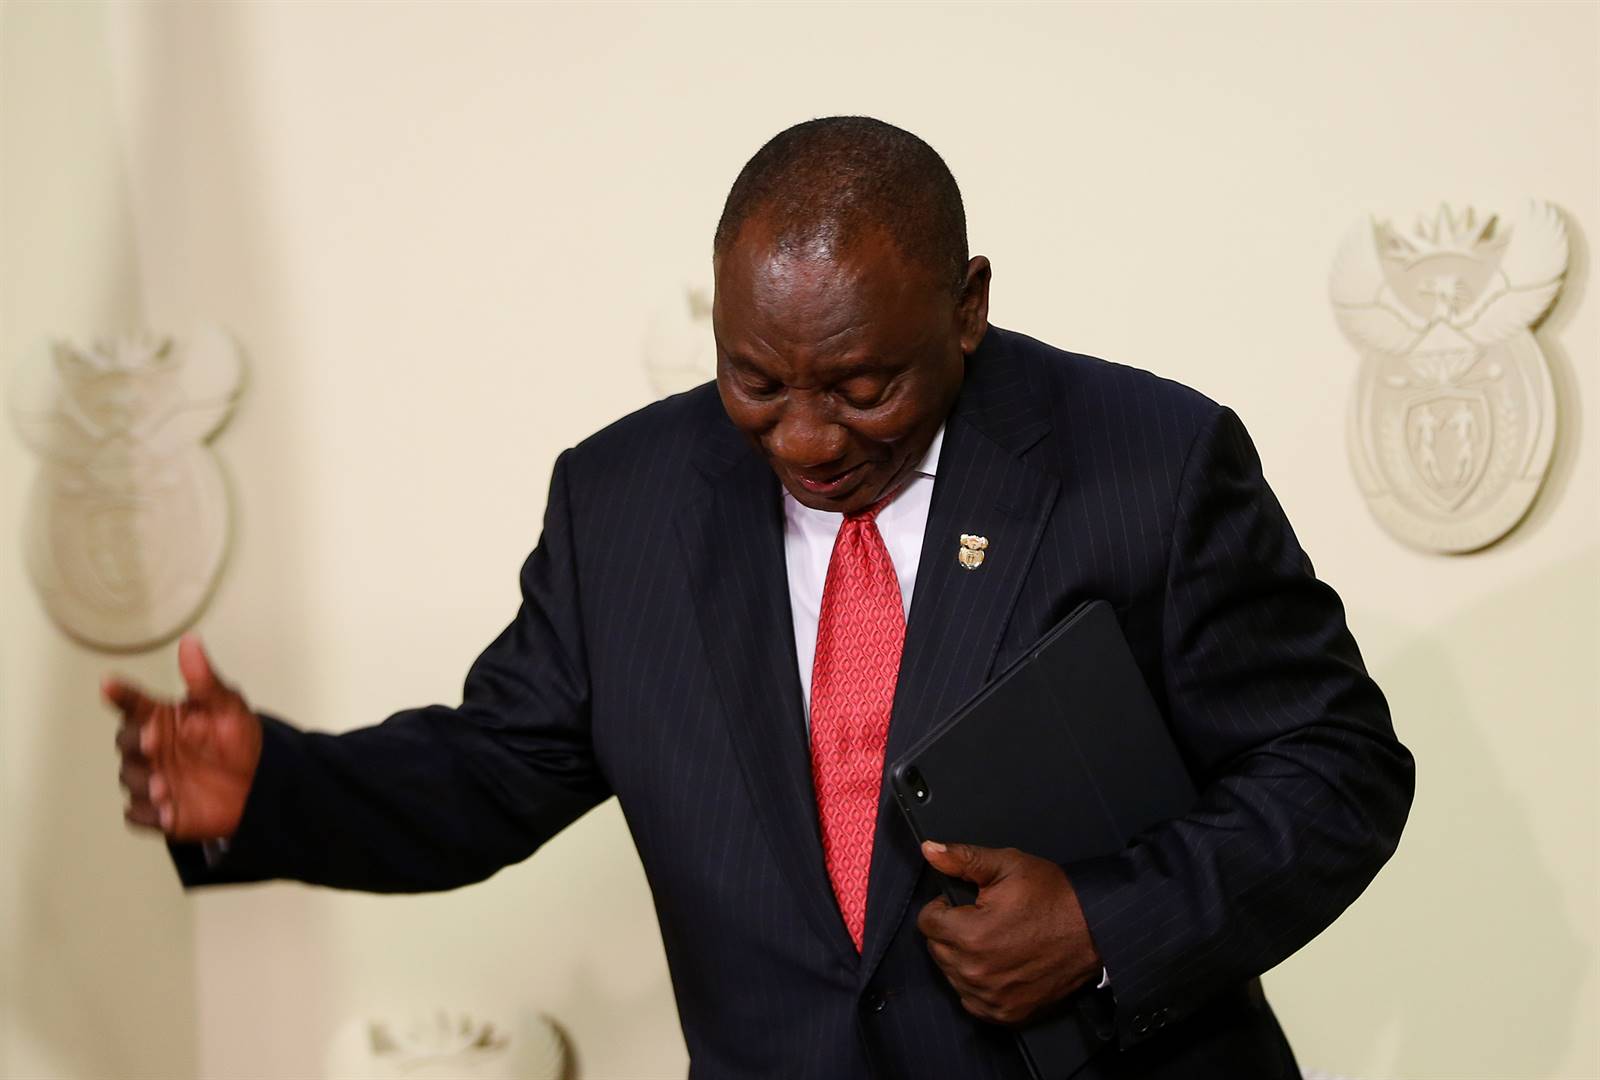 President Cyril Ramaphosa during the announcement of the new cabinet in Pretoria on Wednesday (May 29, 2019). Picture: Siphiwe Sibeko/Reuters